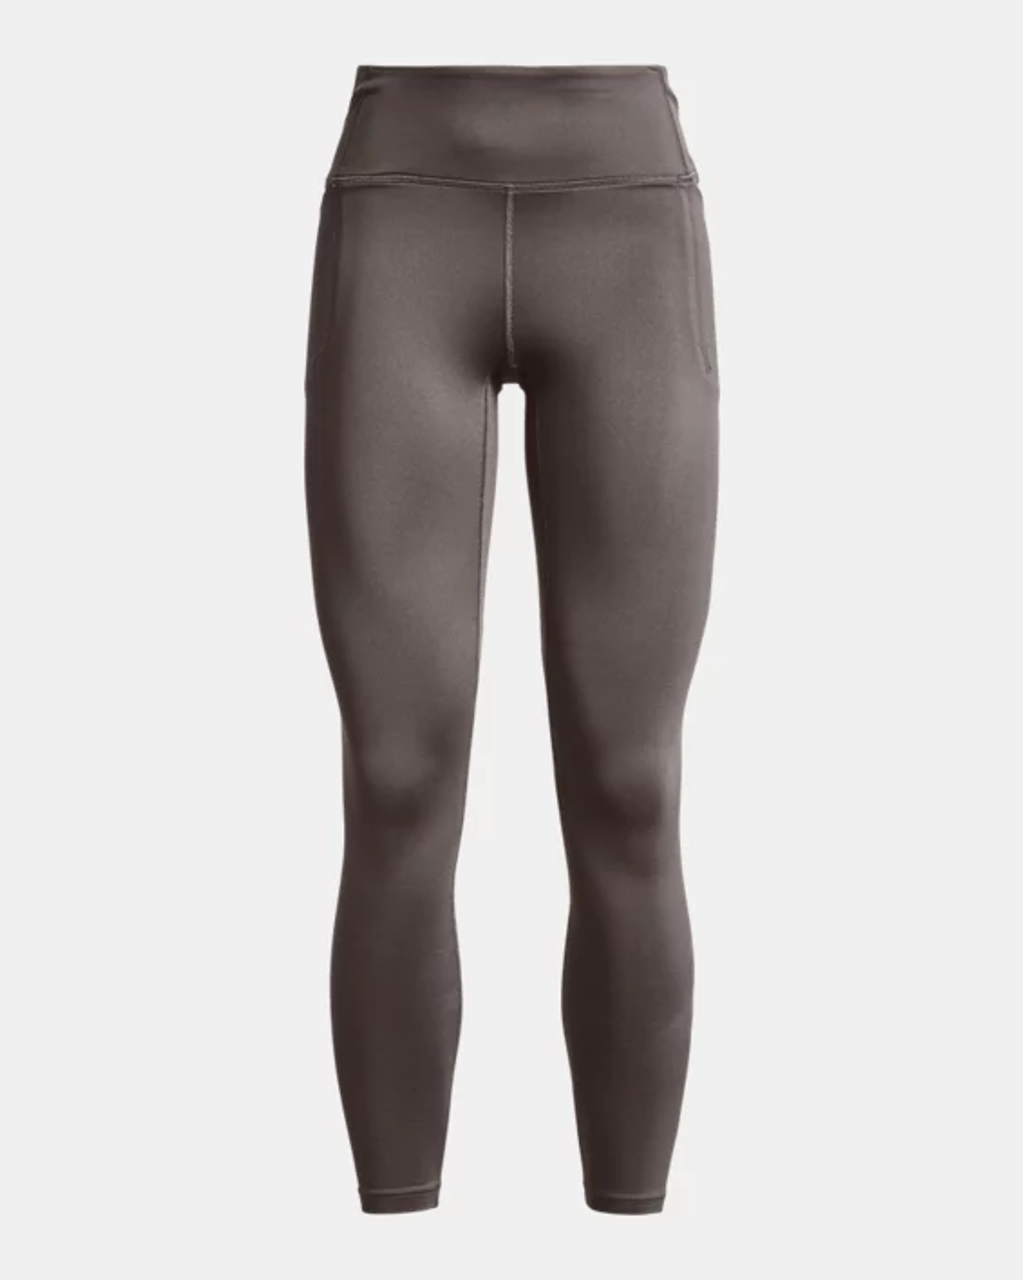 UA Meridian Cold Weather Leggings - Fresh Clay/Ghost Gray